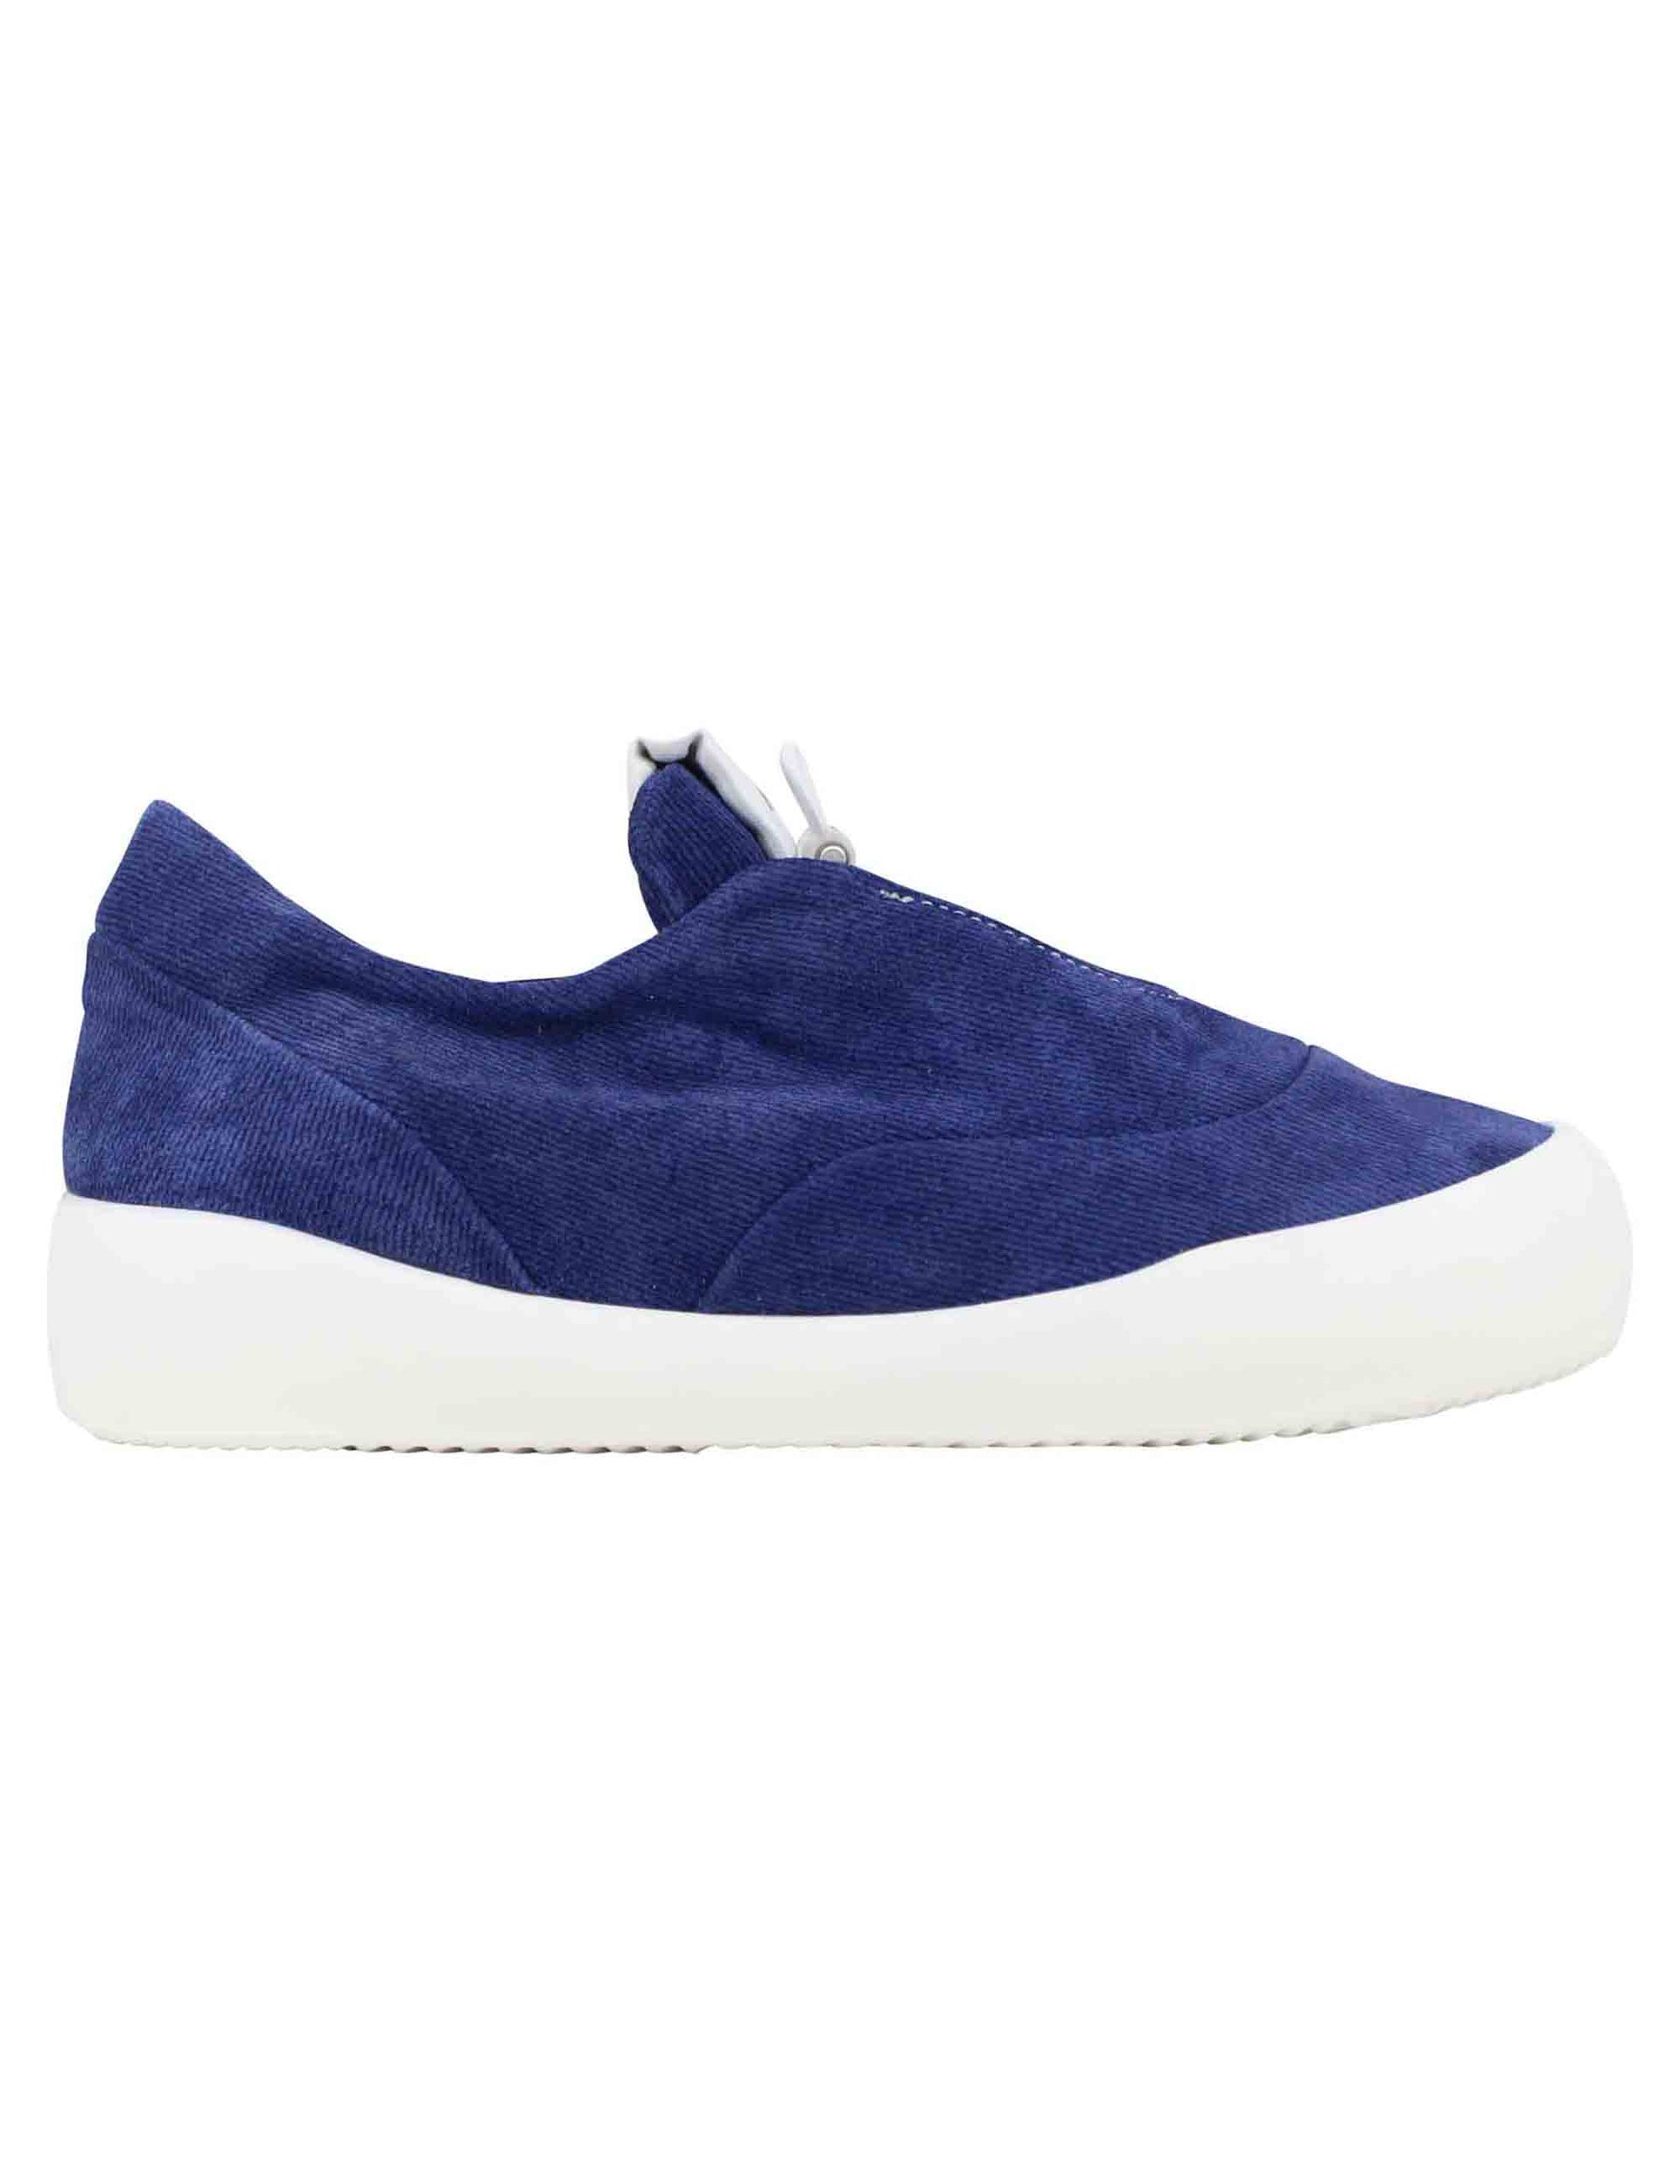 Women's sneakers in blue suede with light rubber sole